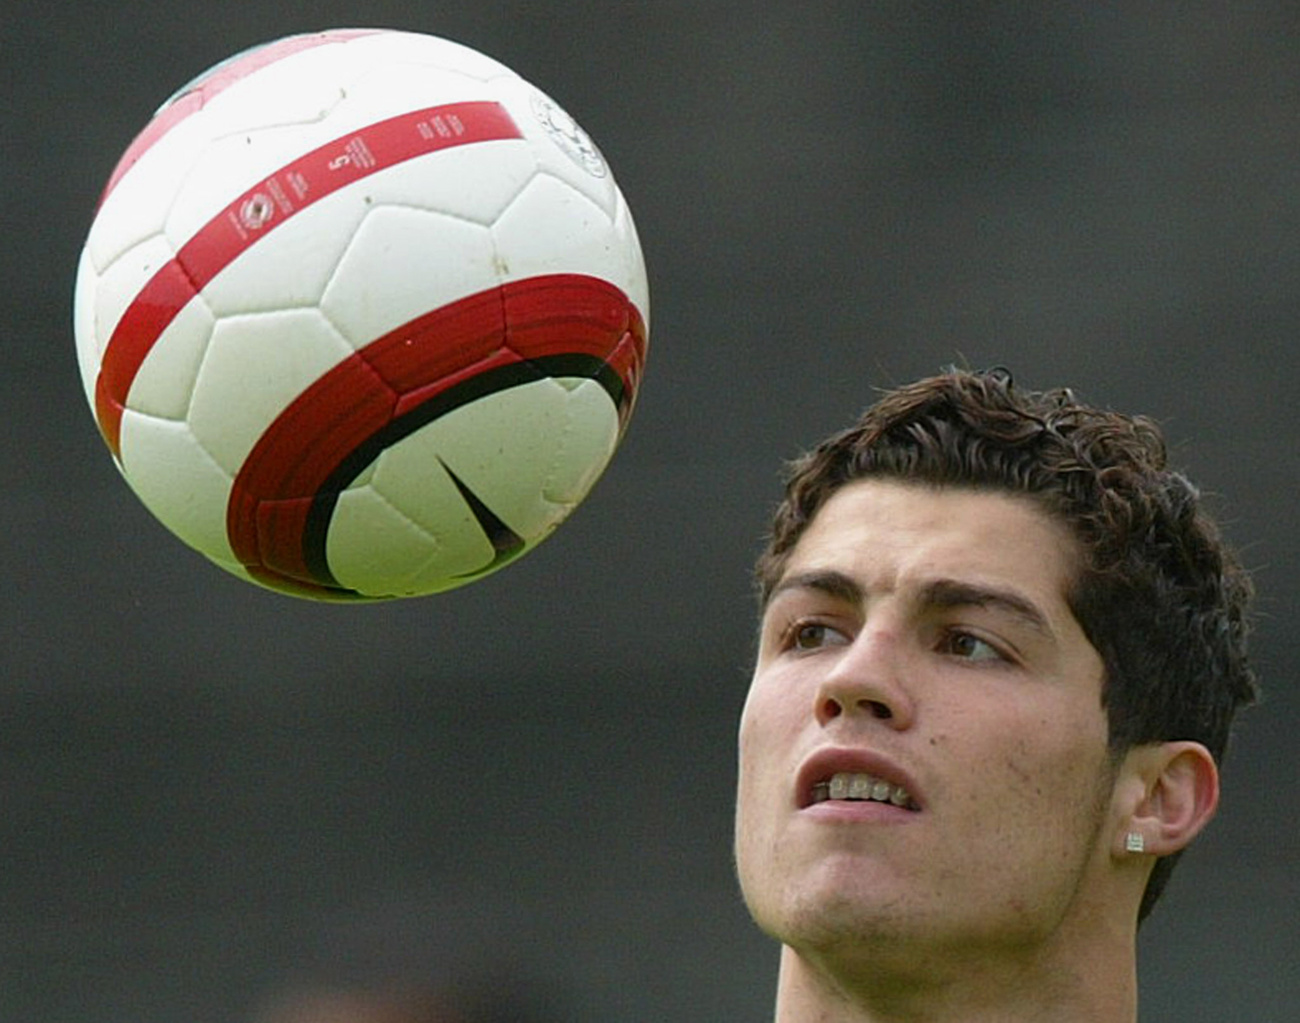 This picture taken on March 6, 2010 shows Real Madrid's Portuguese forward Cristiano Ronaldo reacting during a Spanish league football match against Sevilla at the Santiago Bernabeu Stadium, in Madrid. After a nervous begining the right winger has quickly adapted to the squad set up by the Chilien coach Manuel Pellegrini.